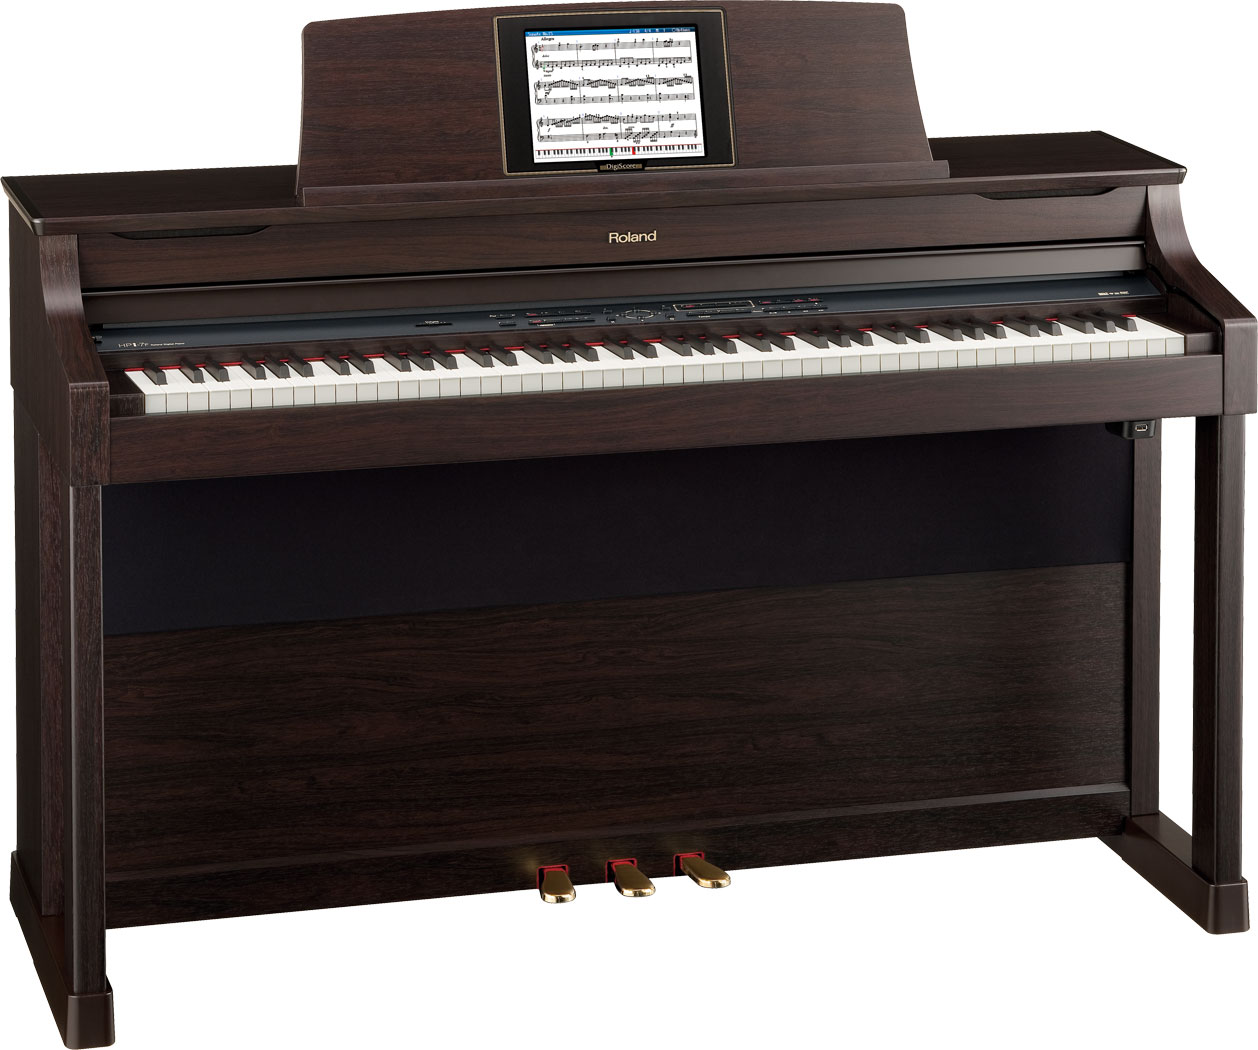 Best Digital Pianos of 2022 The Music Instrument to Play